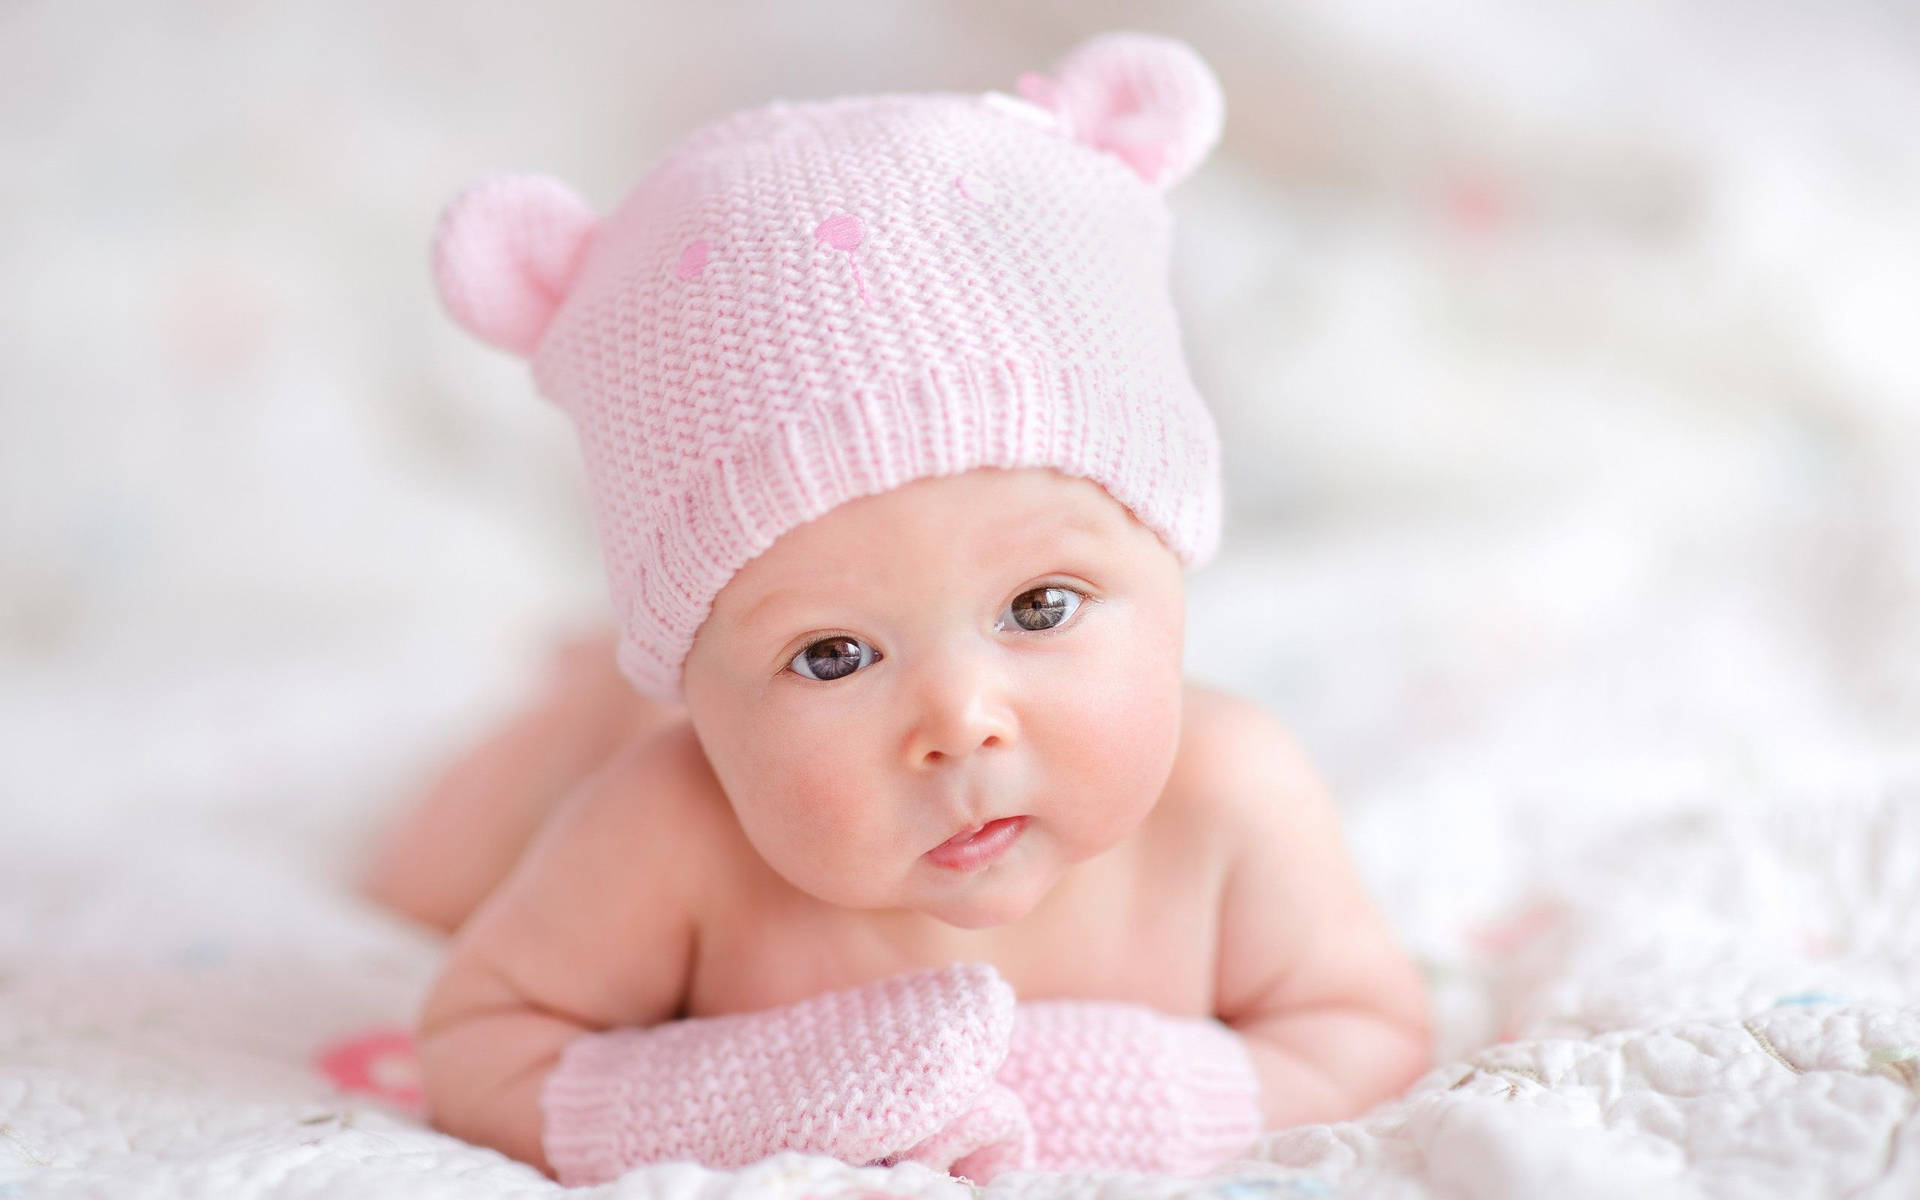 "A baby with a pink bear ear bonnet looking wide-eyed and ready to explore the world!" Wallpaper